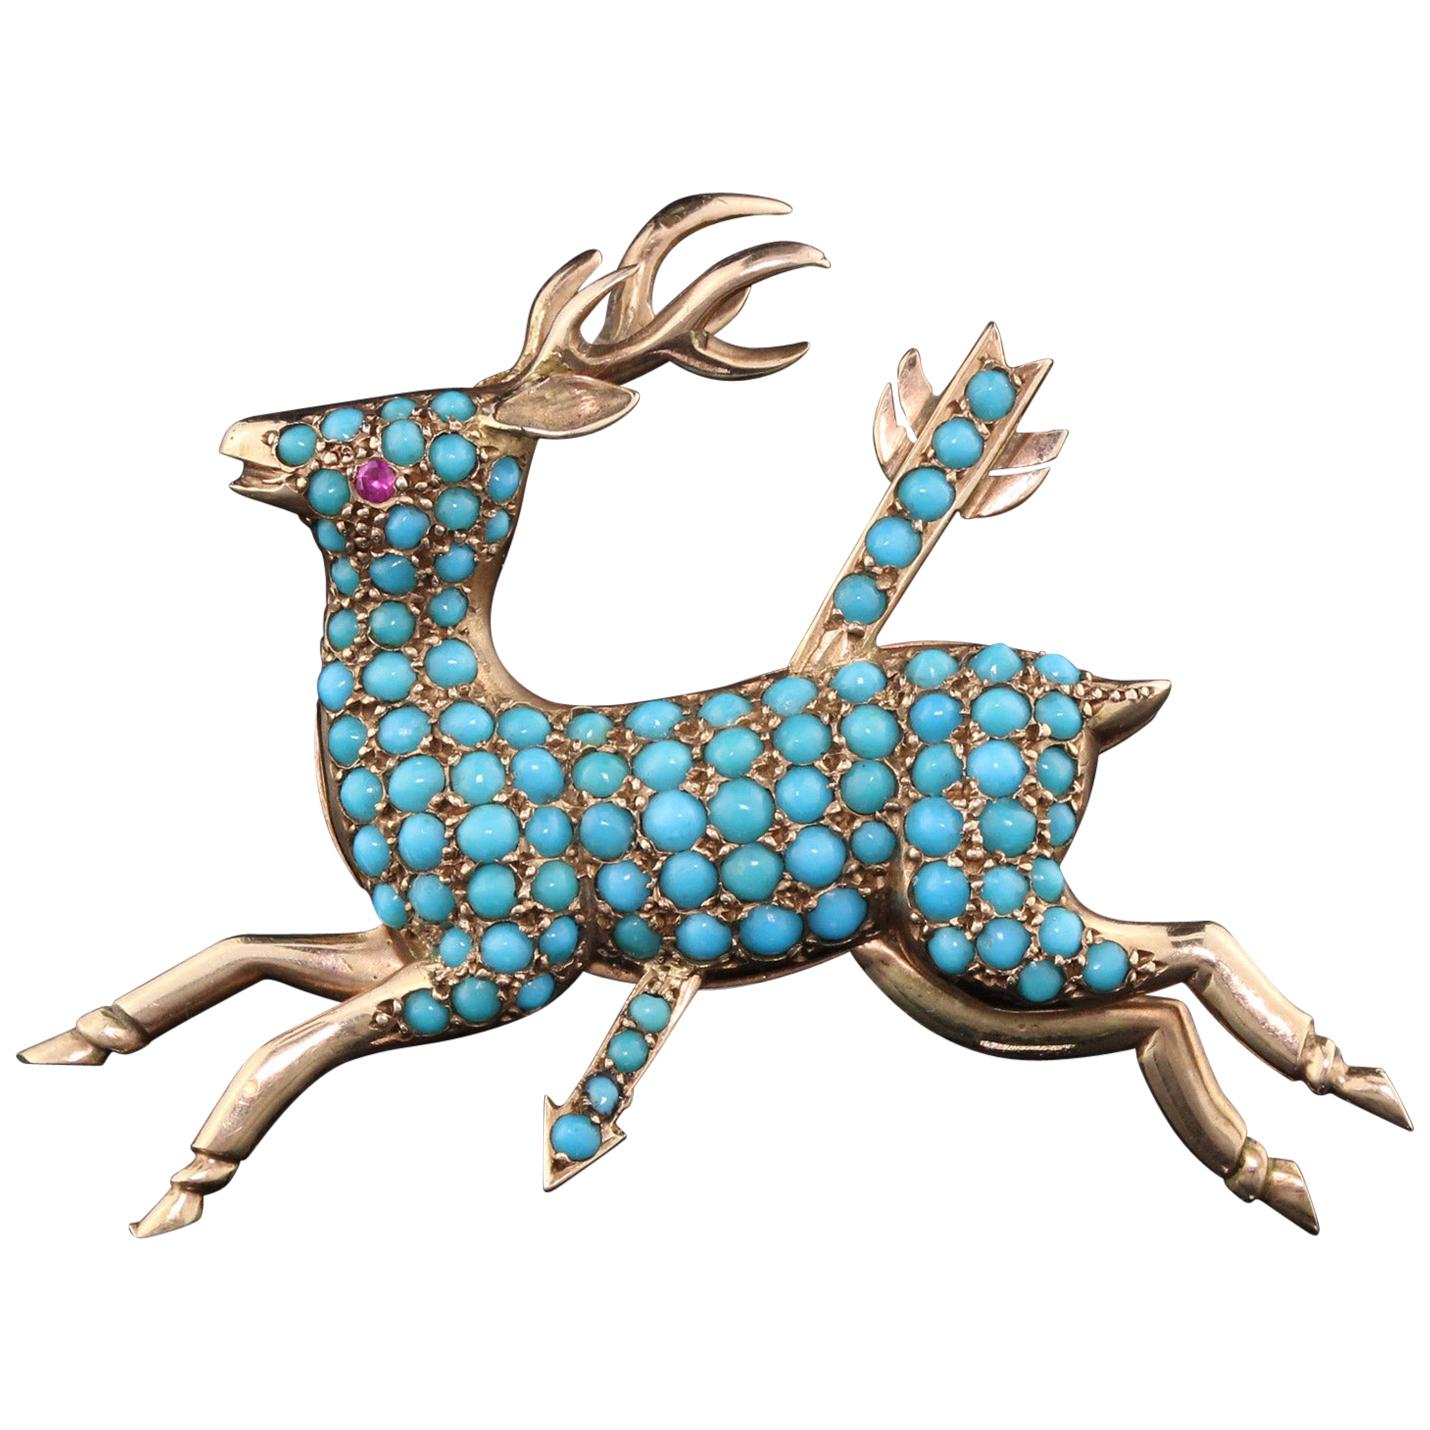 Antique Victorian 14 Karat Yellow Gold and Turquoise Deer Brooch